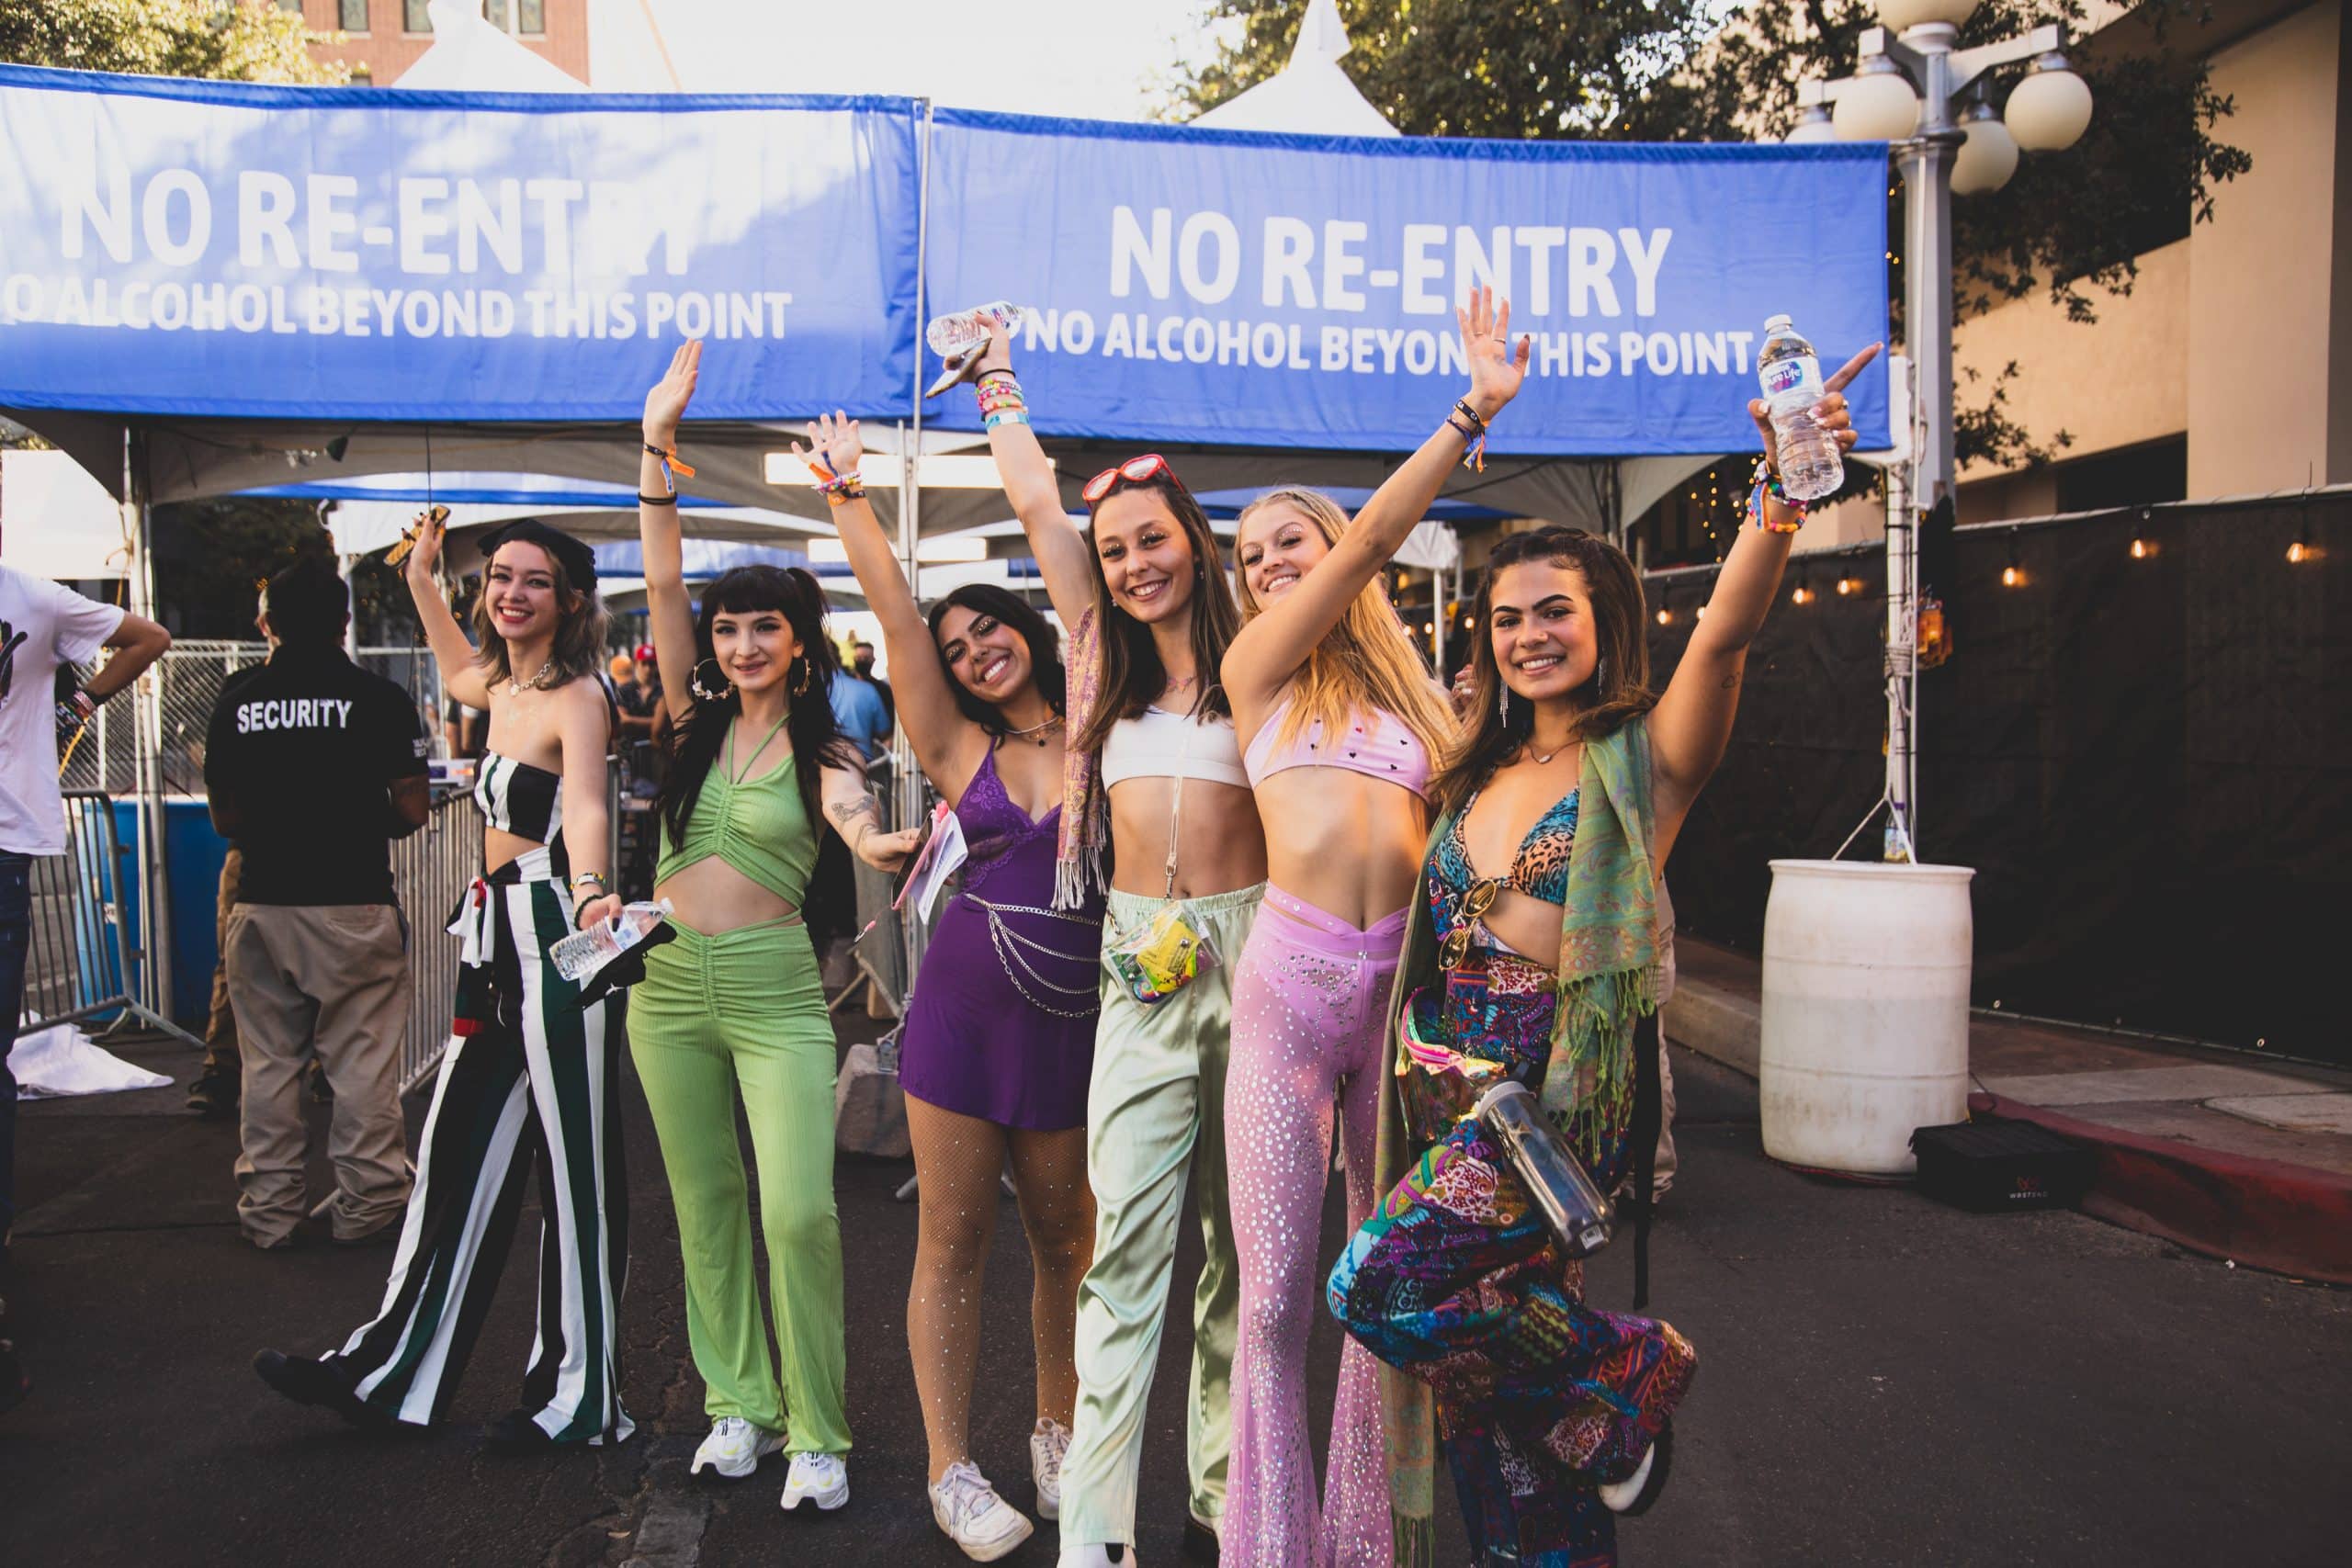 We activate brand marketing activations at festivals, conventions, and nationwide.